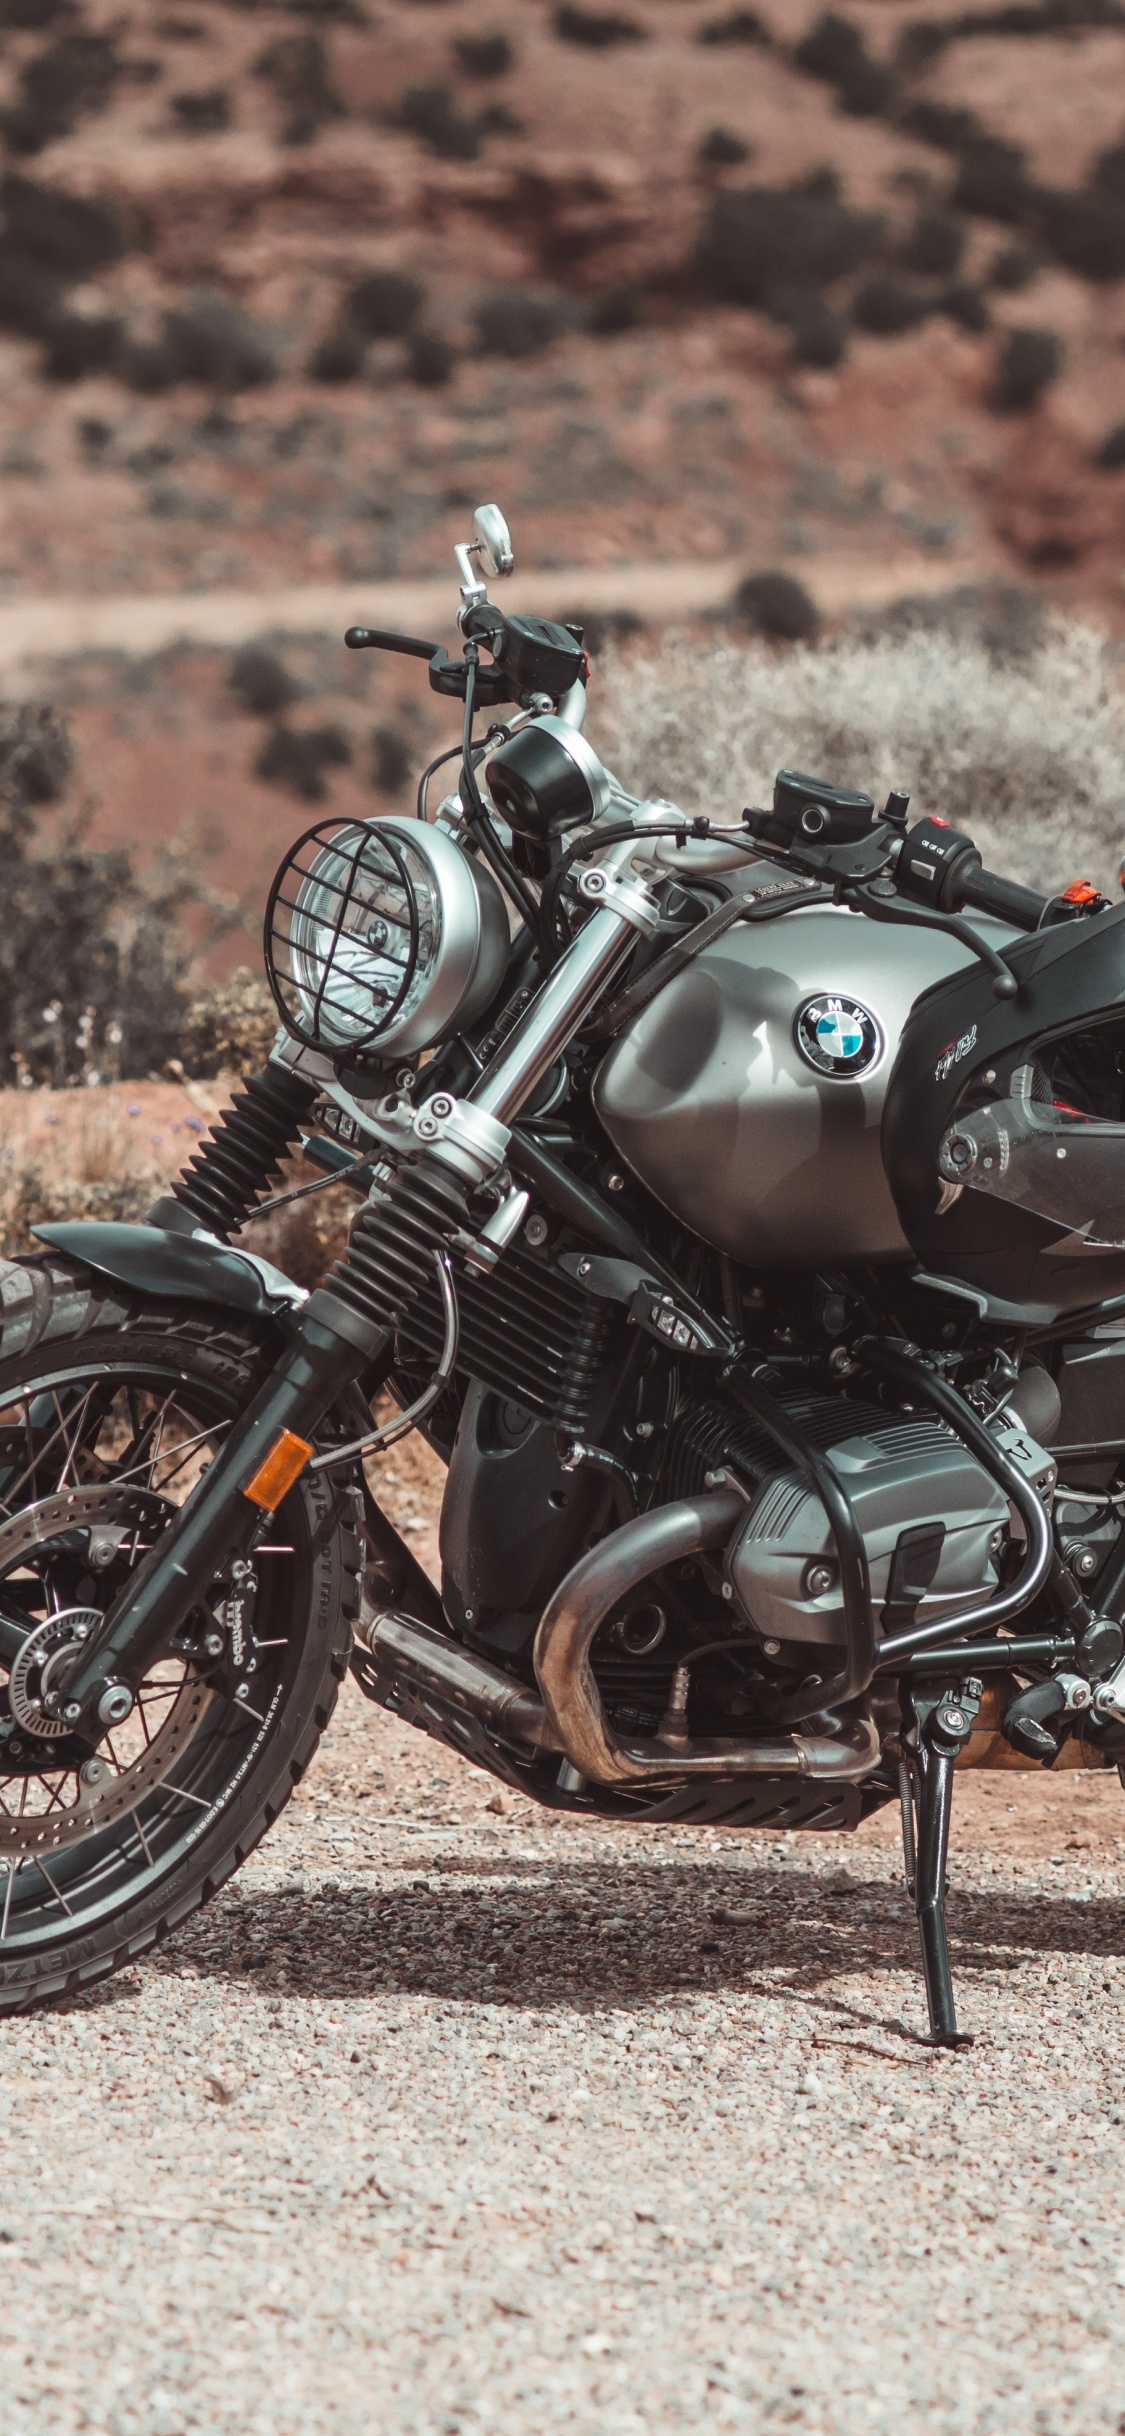 Black and Brown Motorcycle on Brown Sand During Daytime. Wallpaper in 1125x2436 Resolution